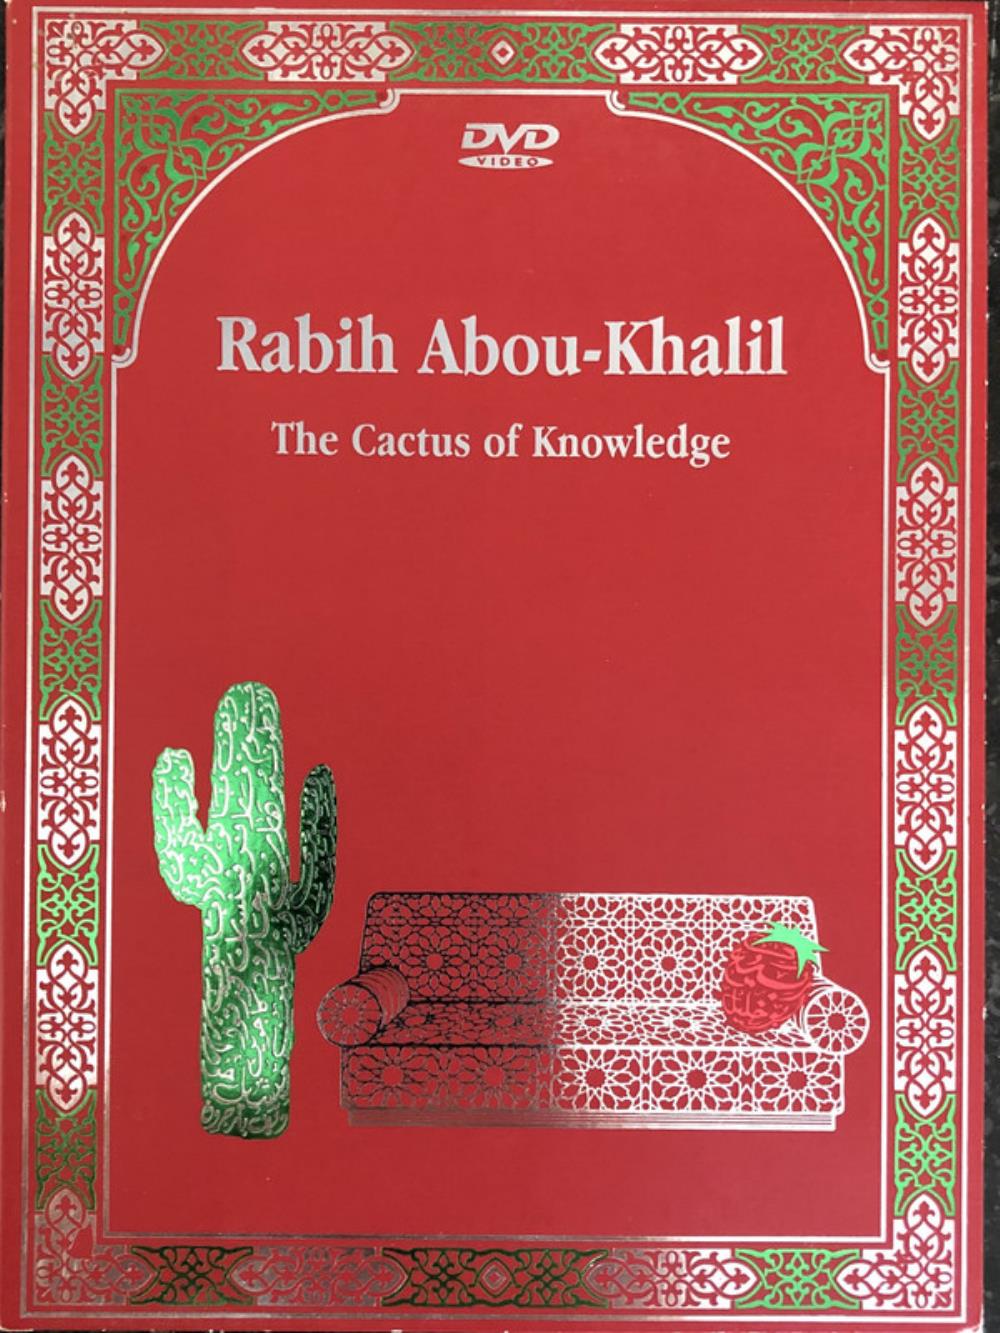 Rabih Abou-Khalil The Cactus of Knowledge album cover